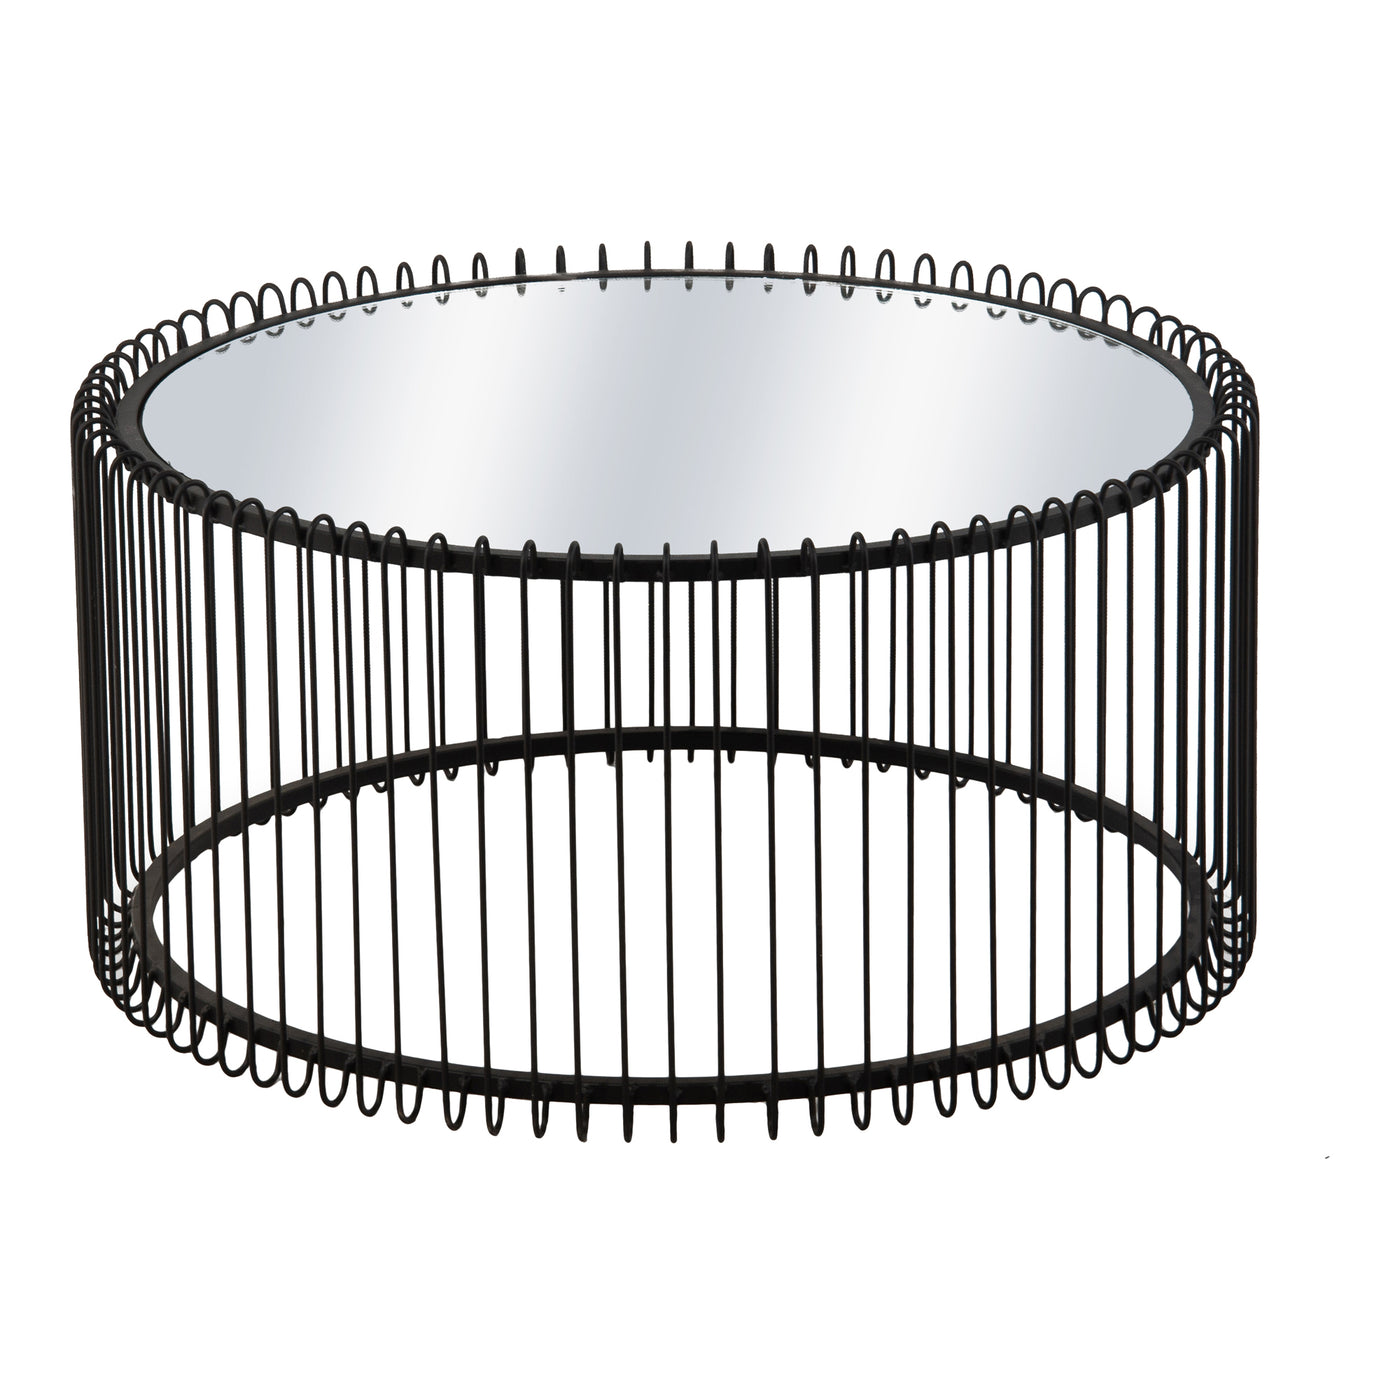 Coiled, contemporary, and sprung with style, this dynamic coffee table features a mirrored glass tabletop and sturdy, blac...